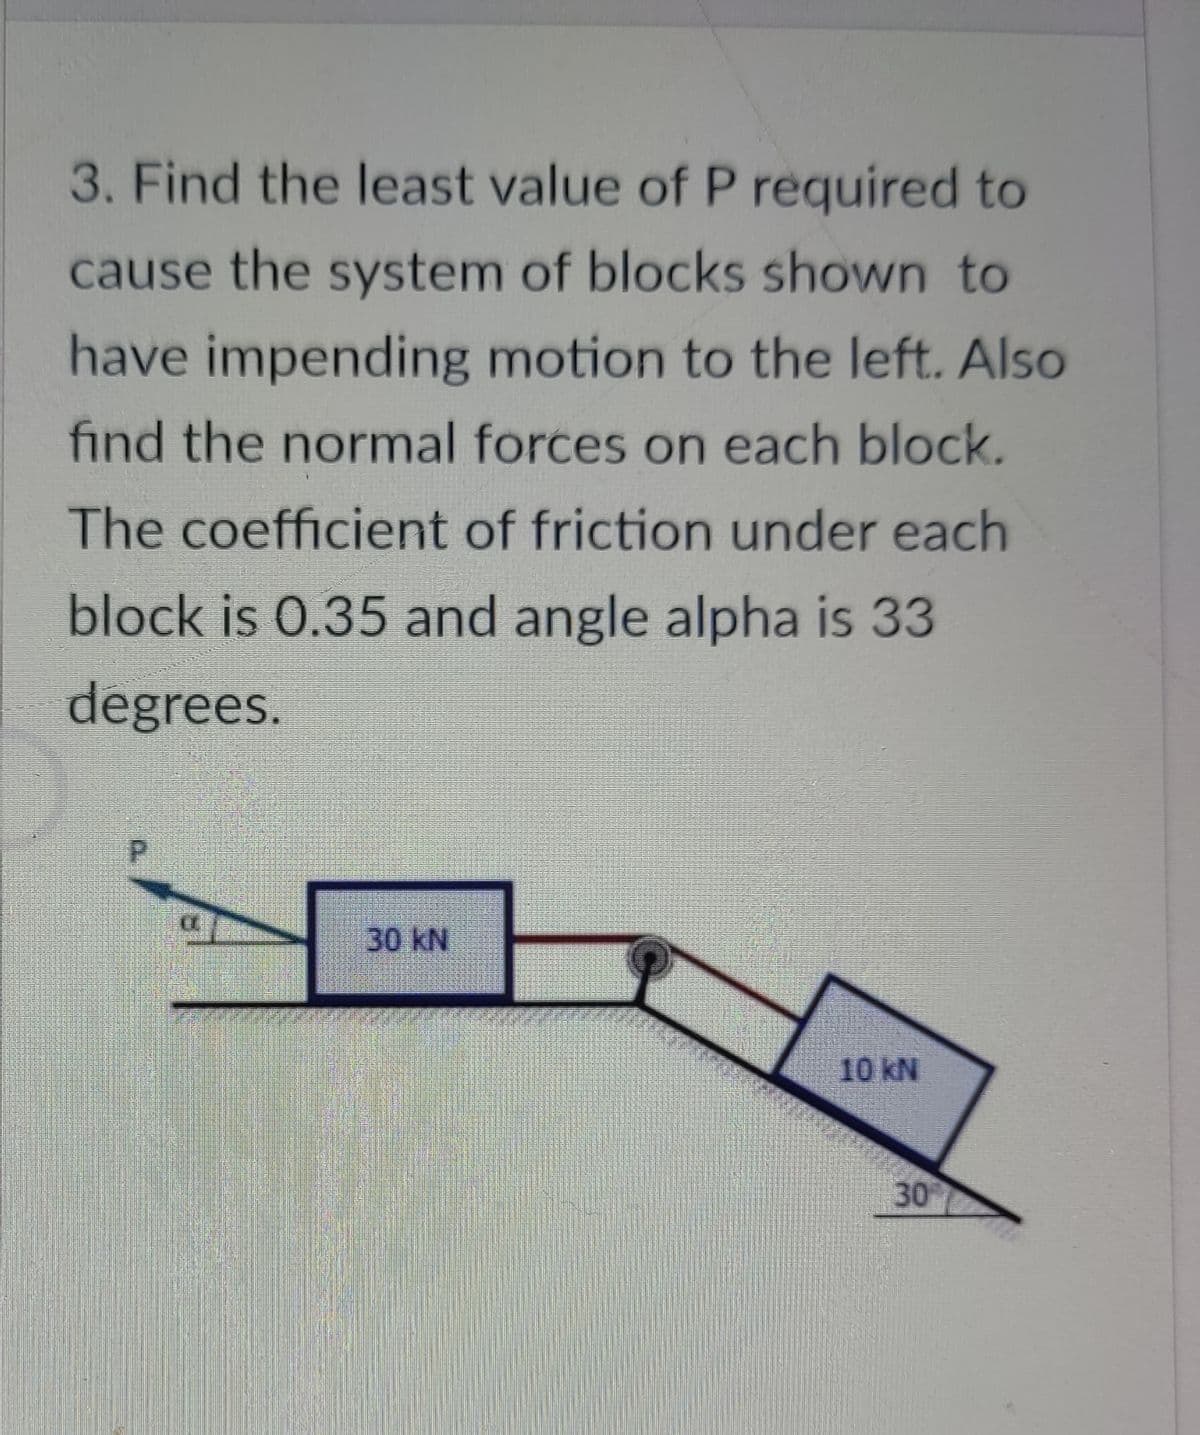 3. Find the least value of P required to
cause the system of blocks shown to
have impending motion to the left. Also
find the normal forces on each block.
The coefficient of friction under each
block is 0.35 and angle alpha is 33
degrees.
30 kN
10 kN
30
